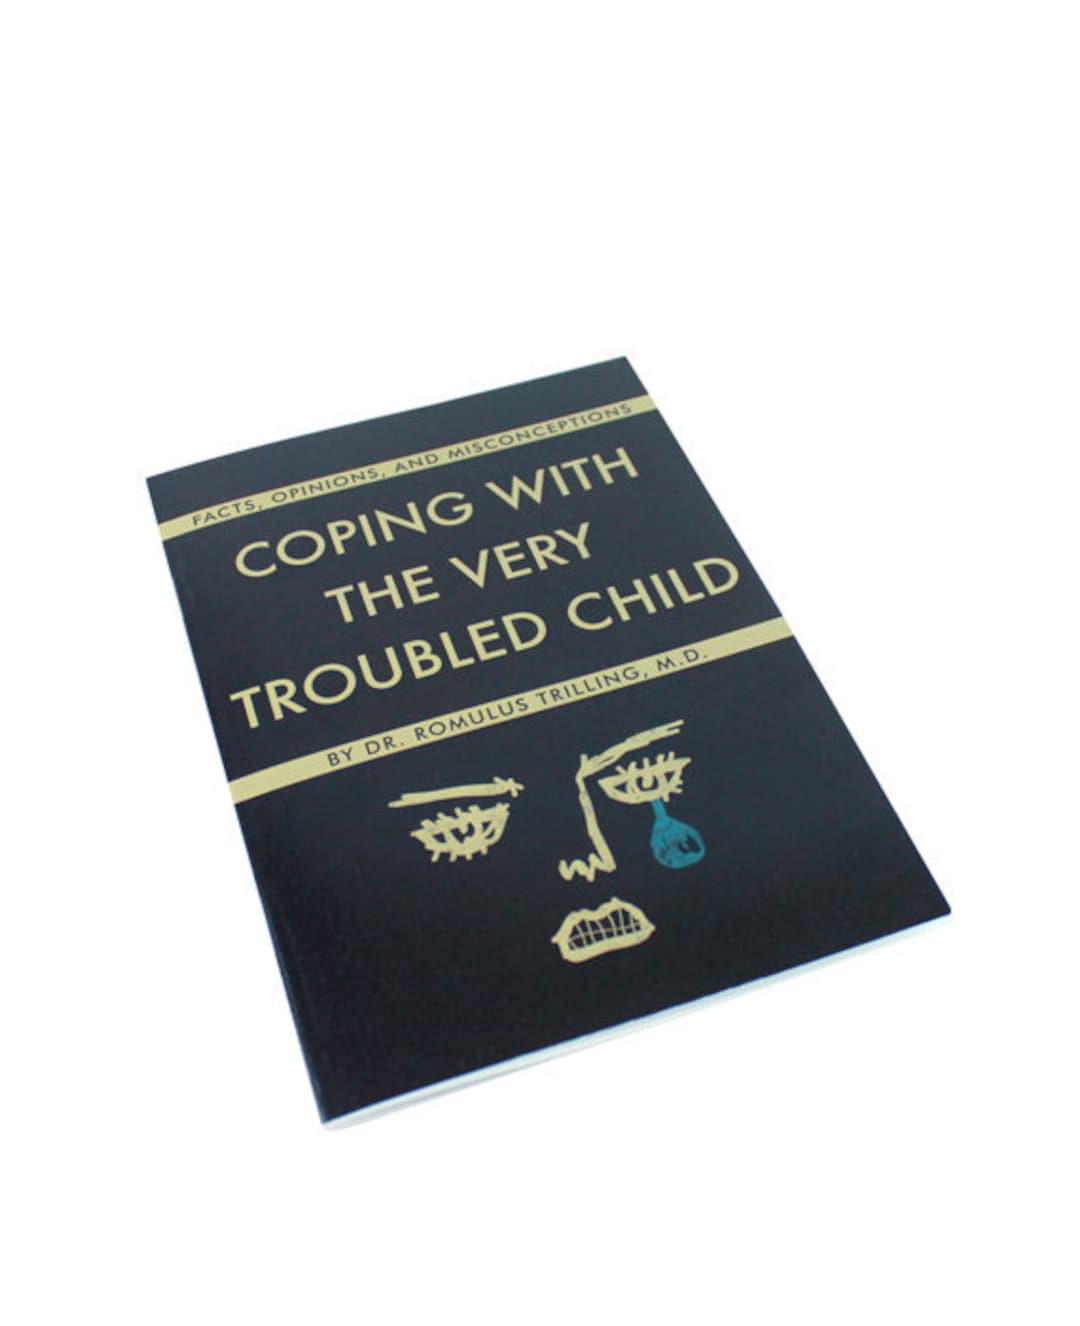 Coping with the Very Troubled Child Sticker for Sale by